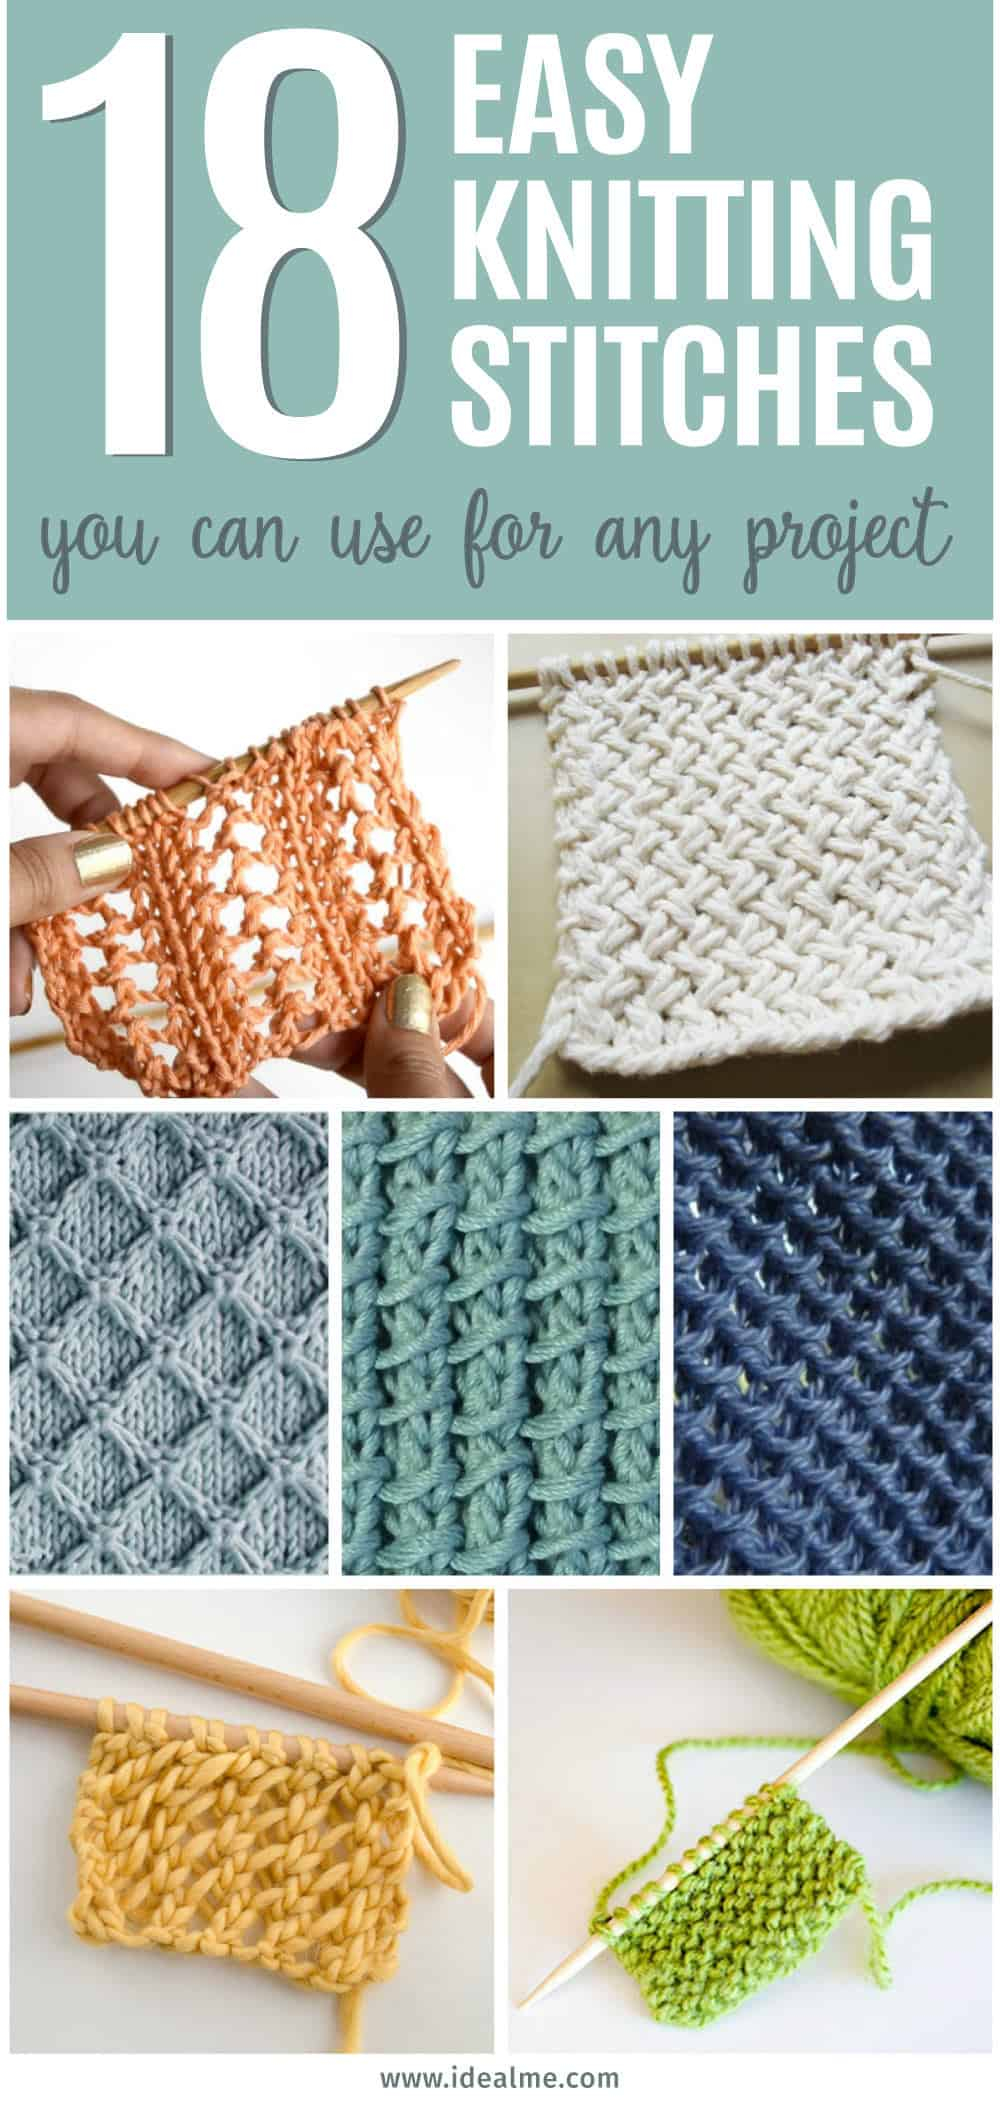 Knitting Pattern For Beginners 18 Easy Knitting Stitches You Can Use For Any Project Ideal Me